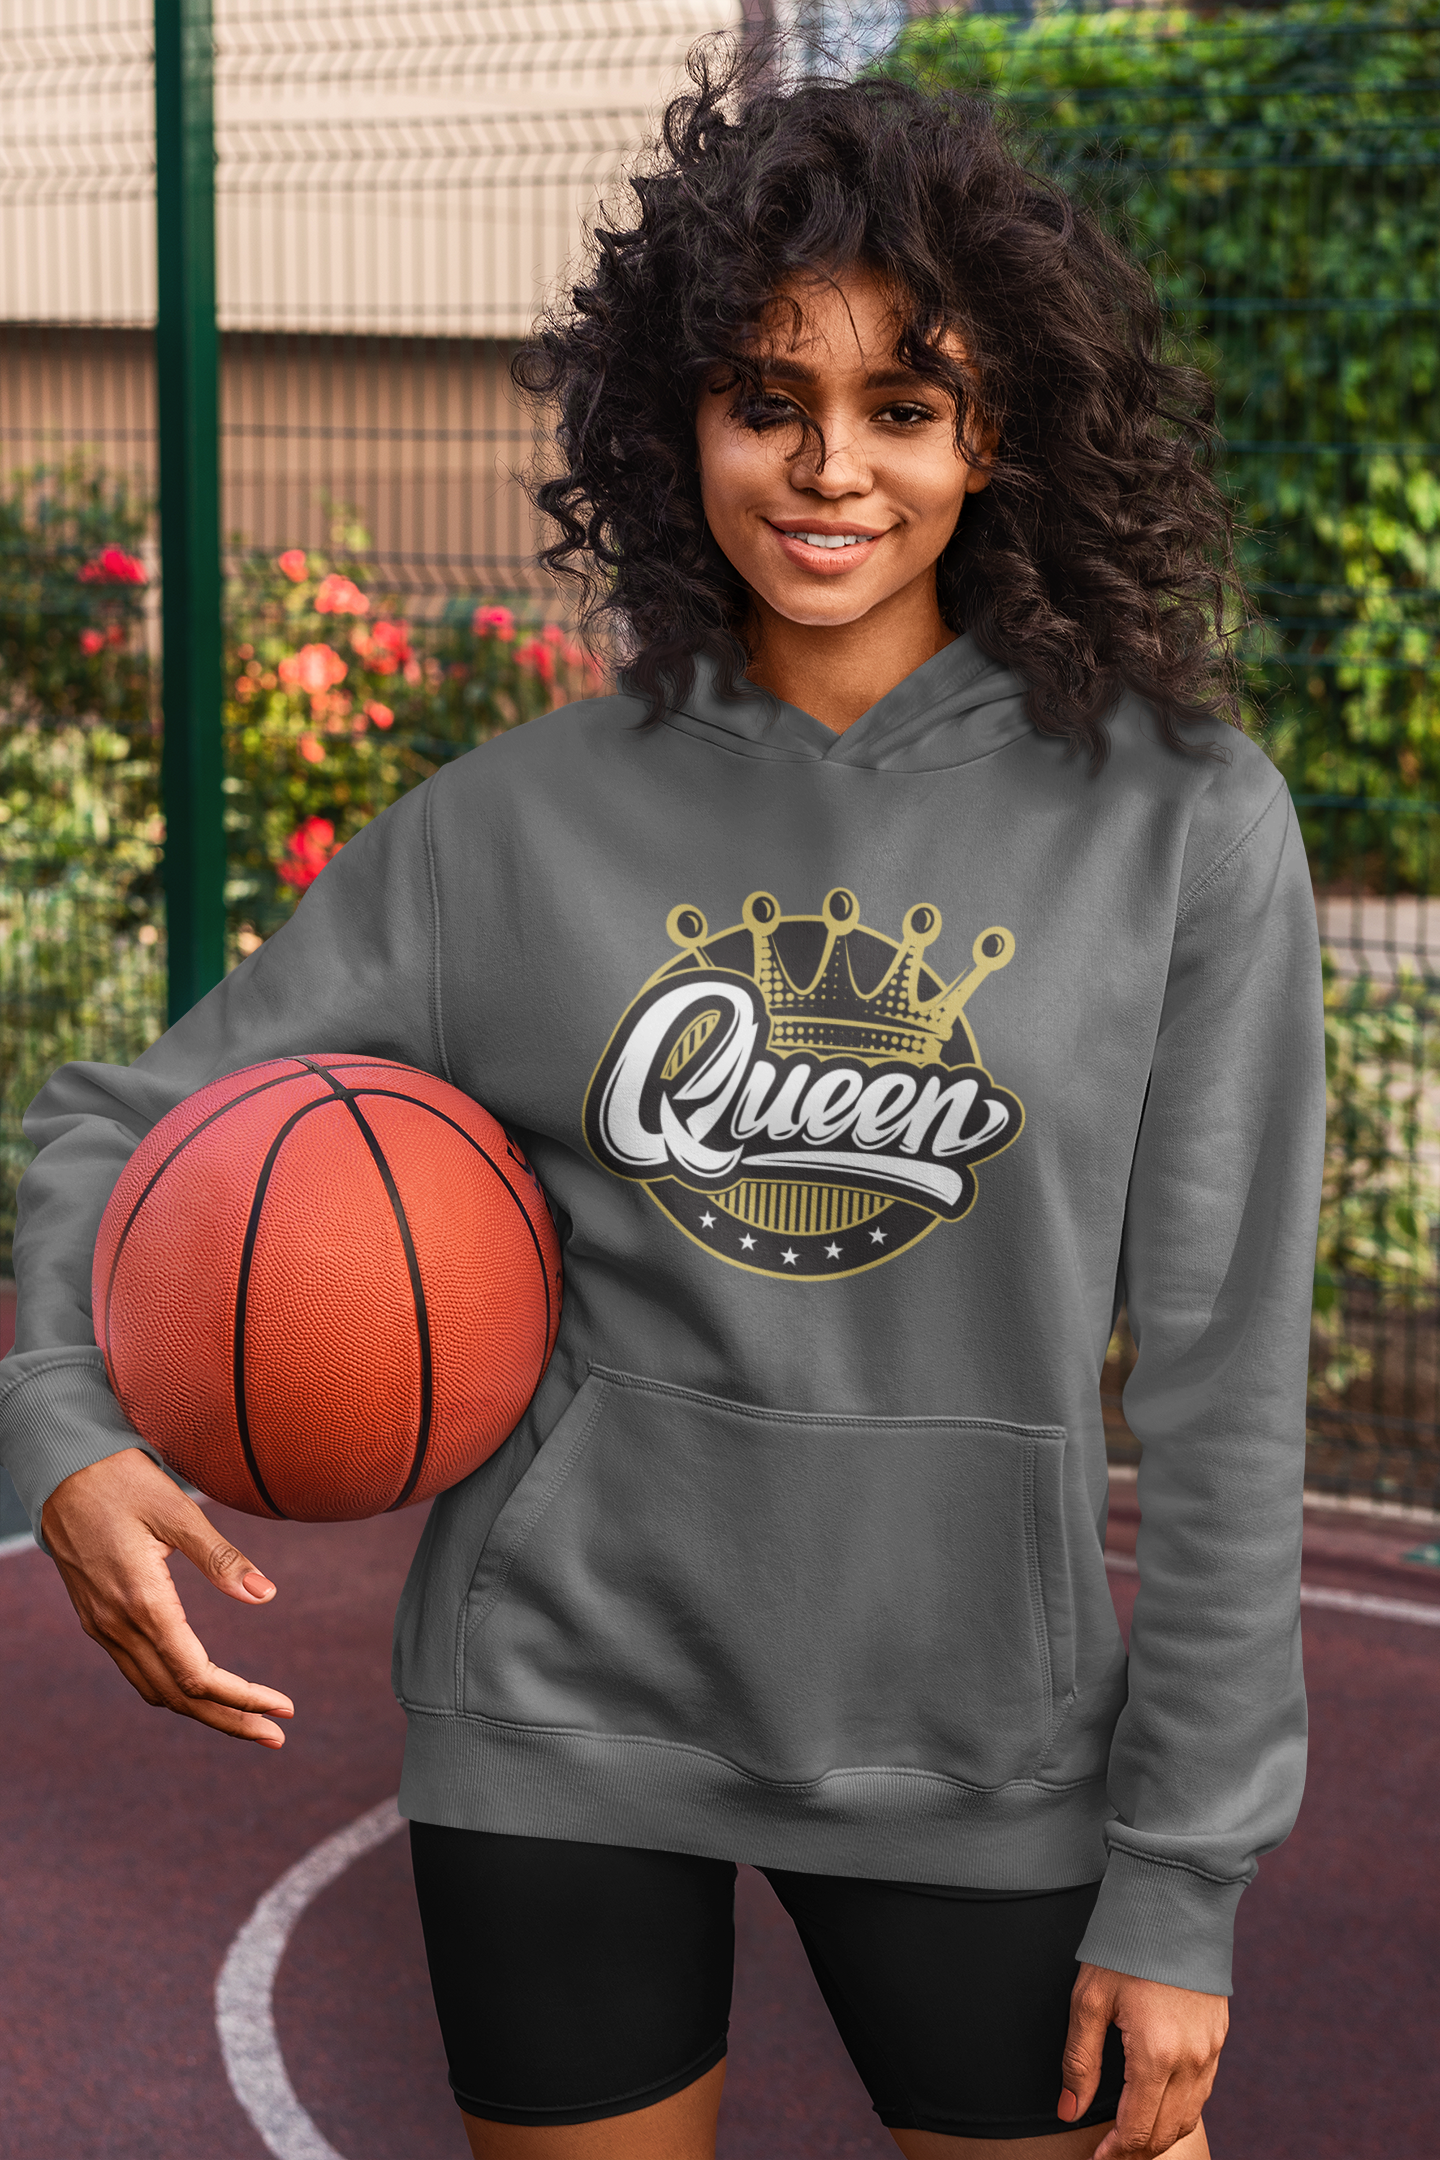 "Queen" Hoodie (Available in Multiple Colors)